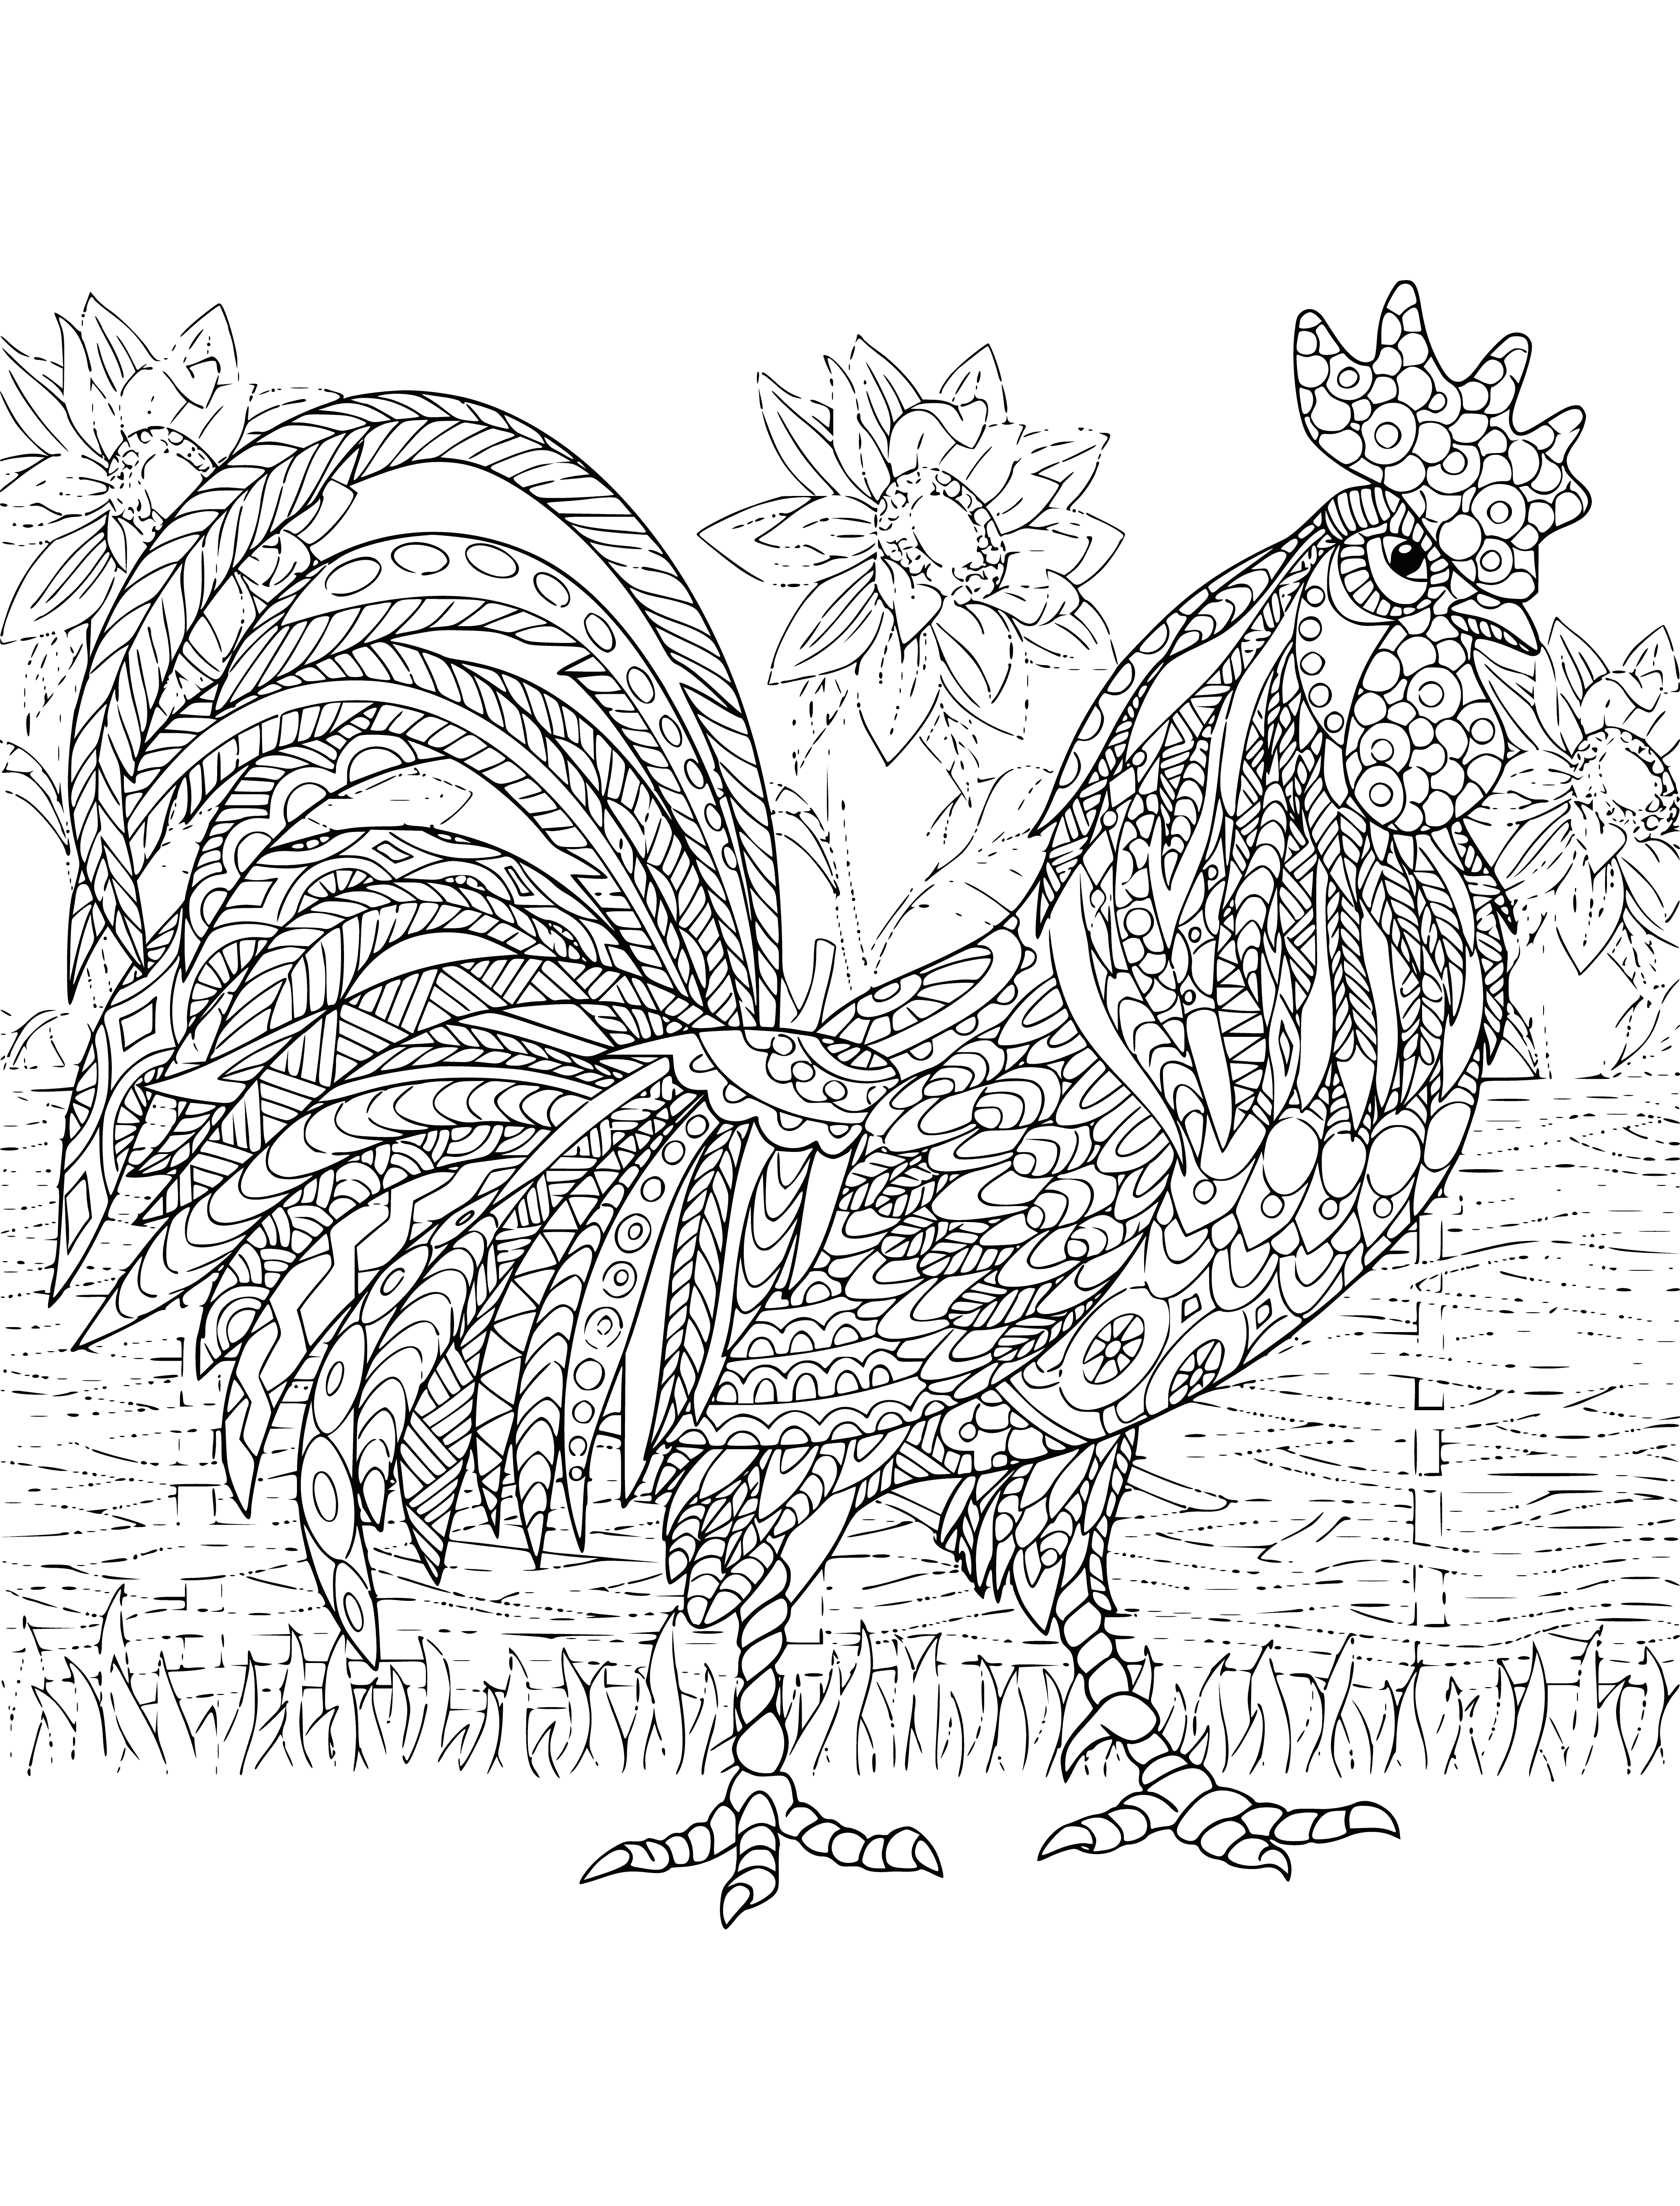 Rooster at the wattle fence coloring page